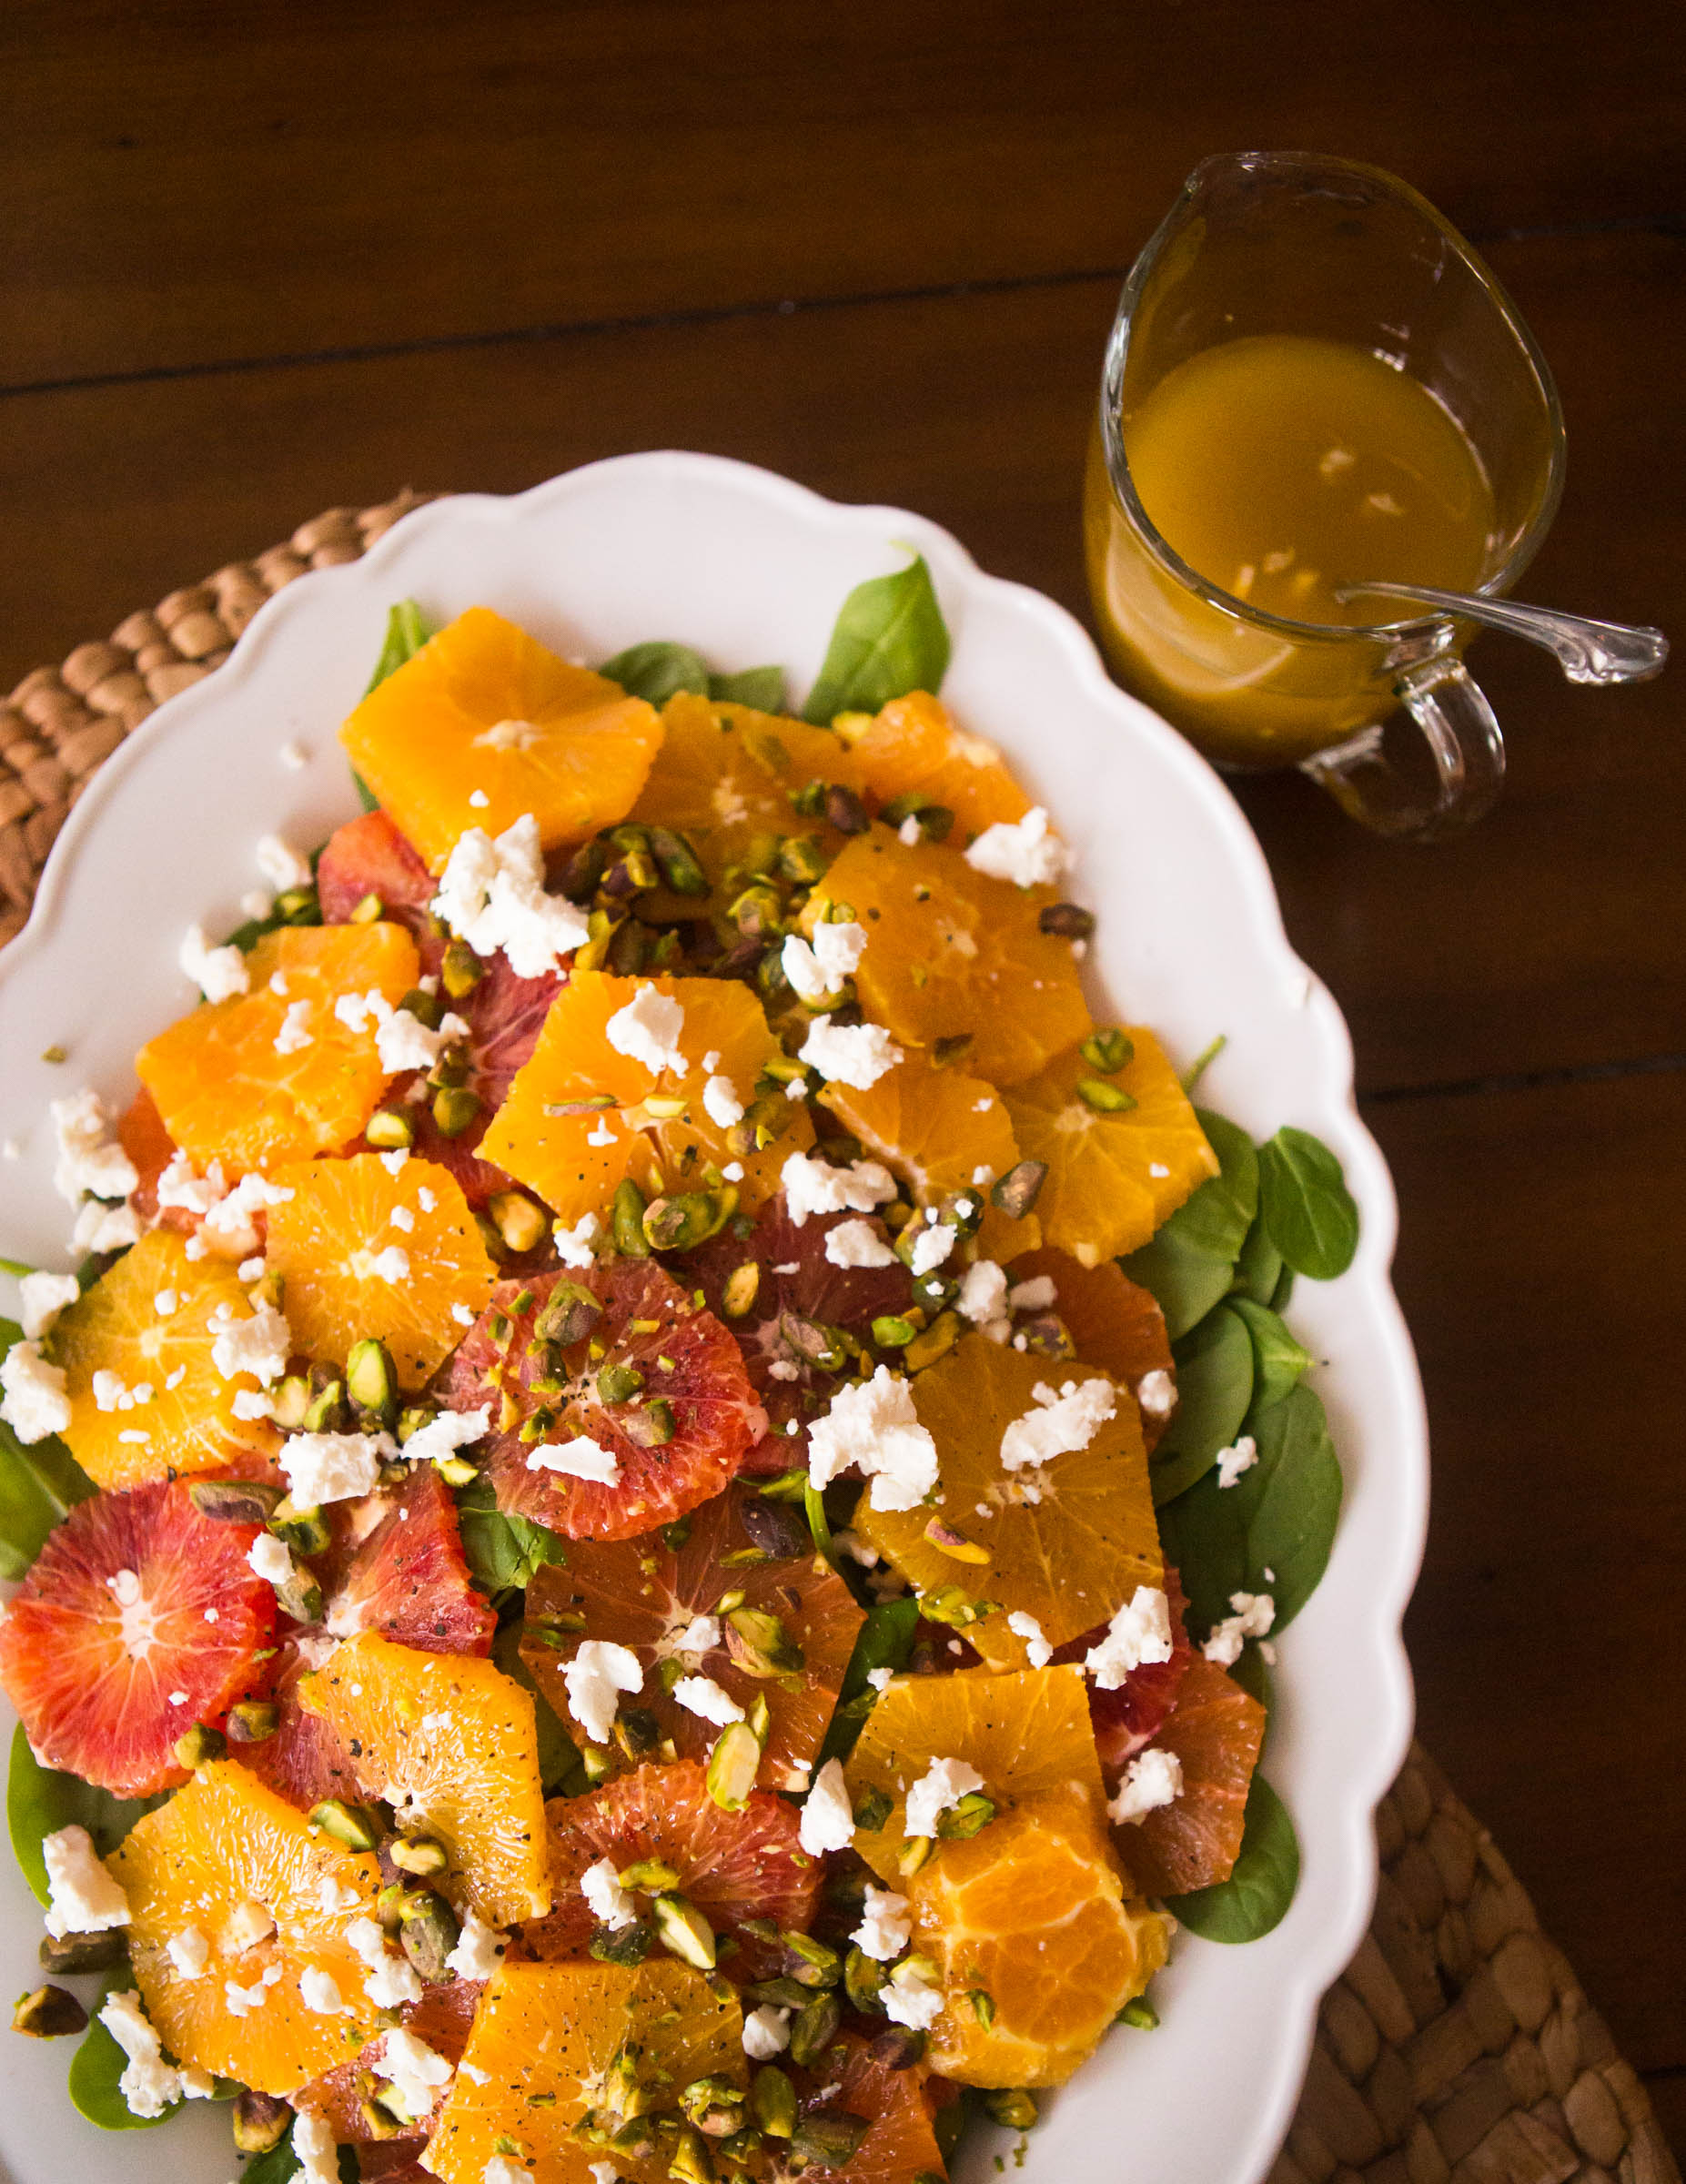 Sliced citrus salad features fresh oranges, baby spinach, and pistachios in layers on a ruffled white platter next to a serving pitcher of homemade dressing.